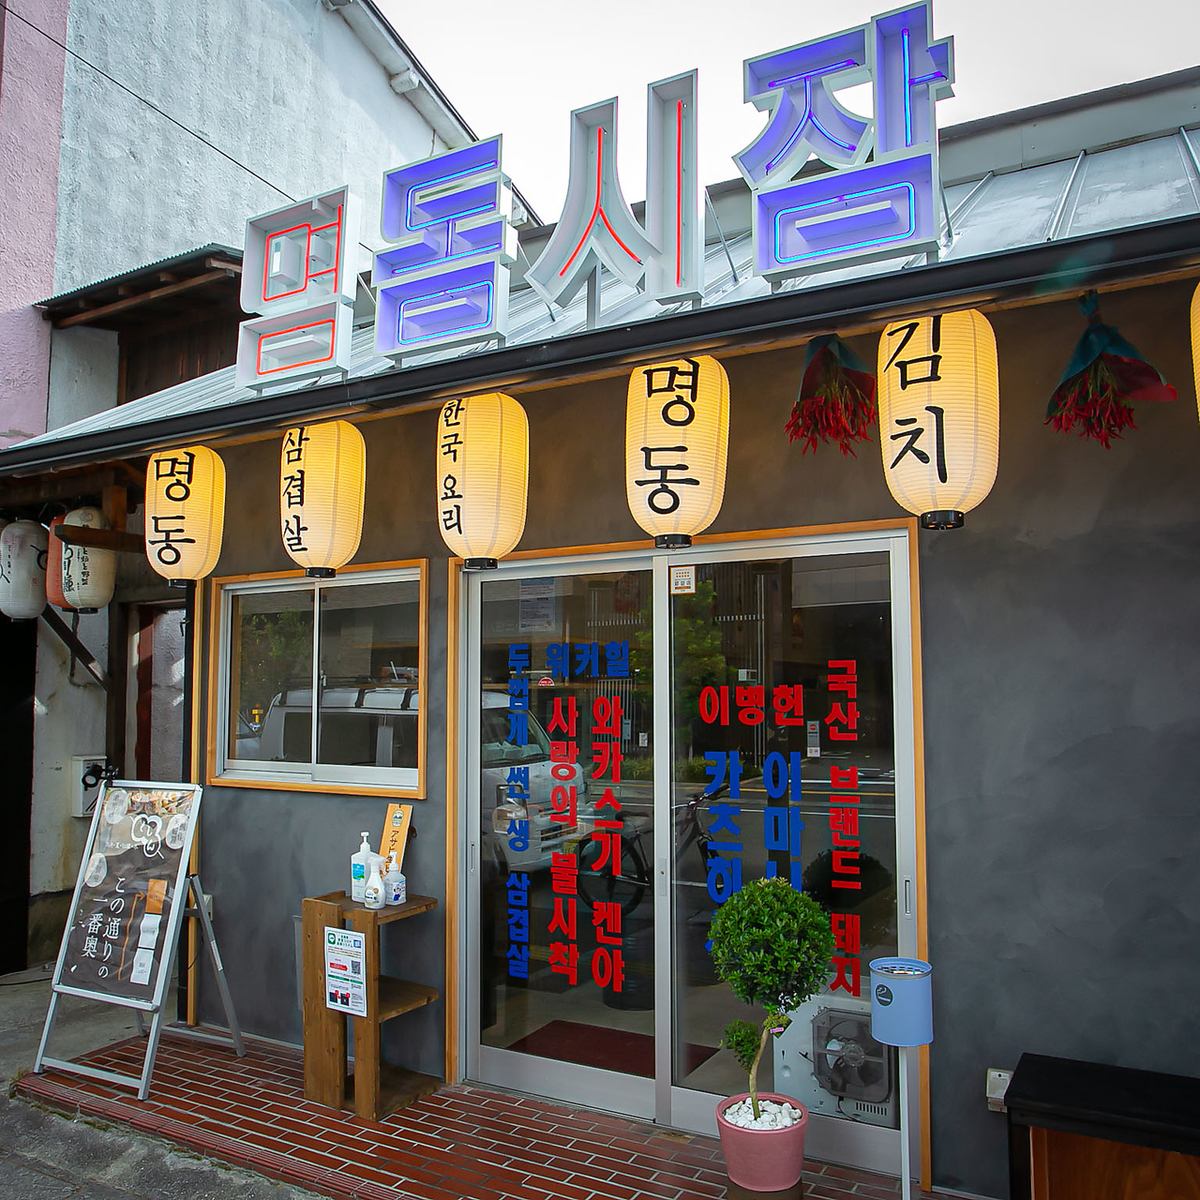 You can enjoy the special Korean food!